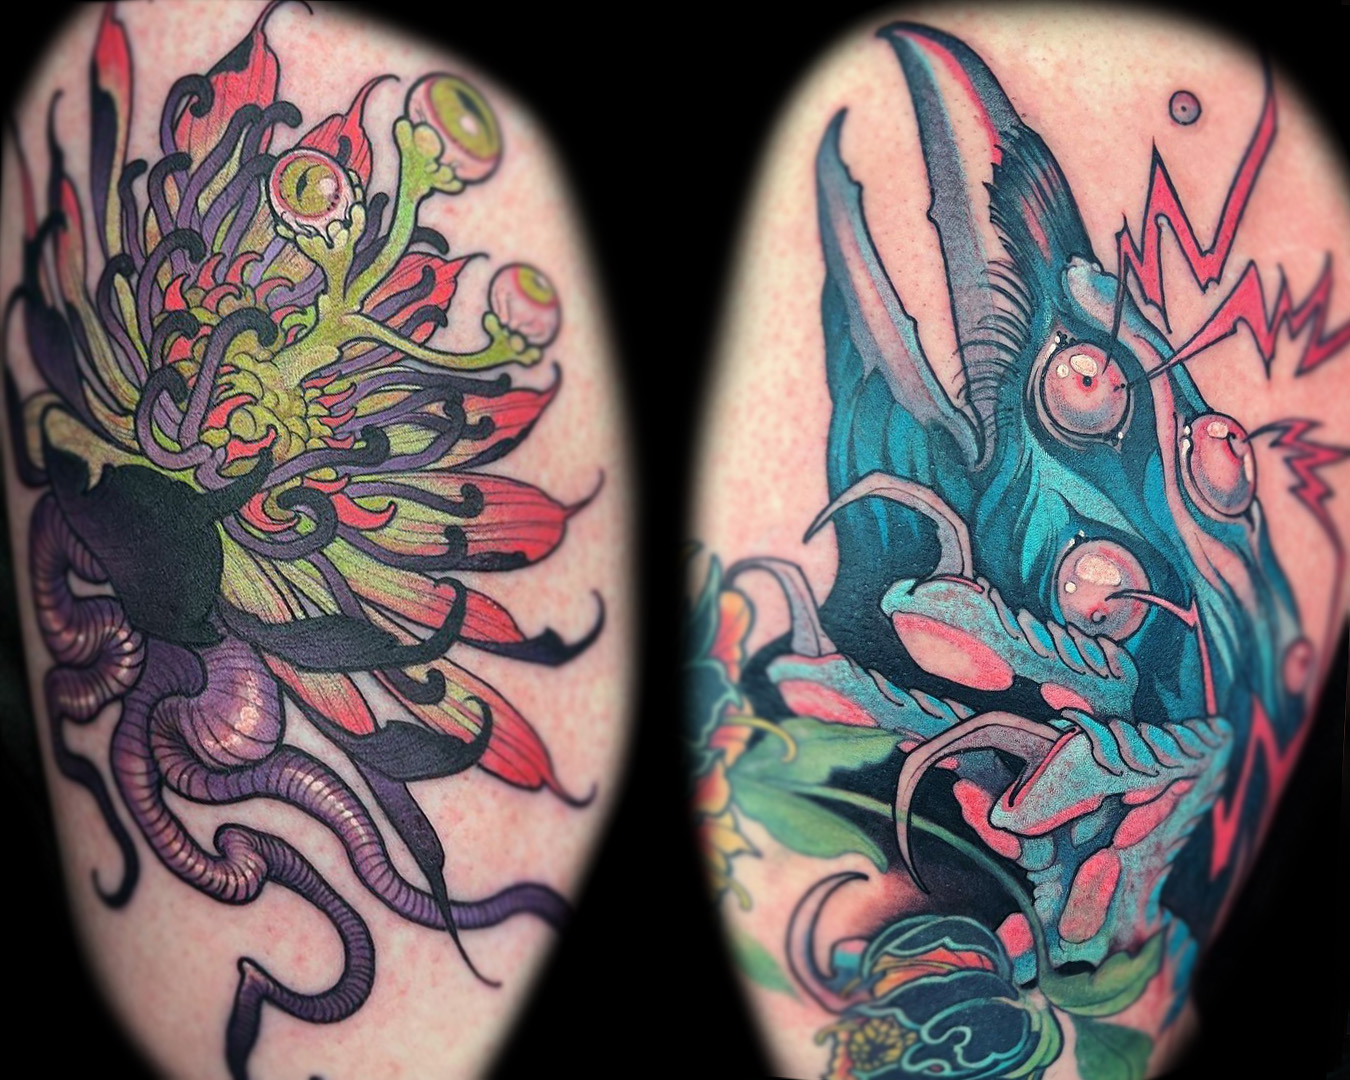 space crow and monster tentacle flower tattoos by teresa sharpe